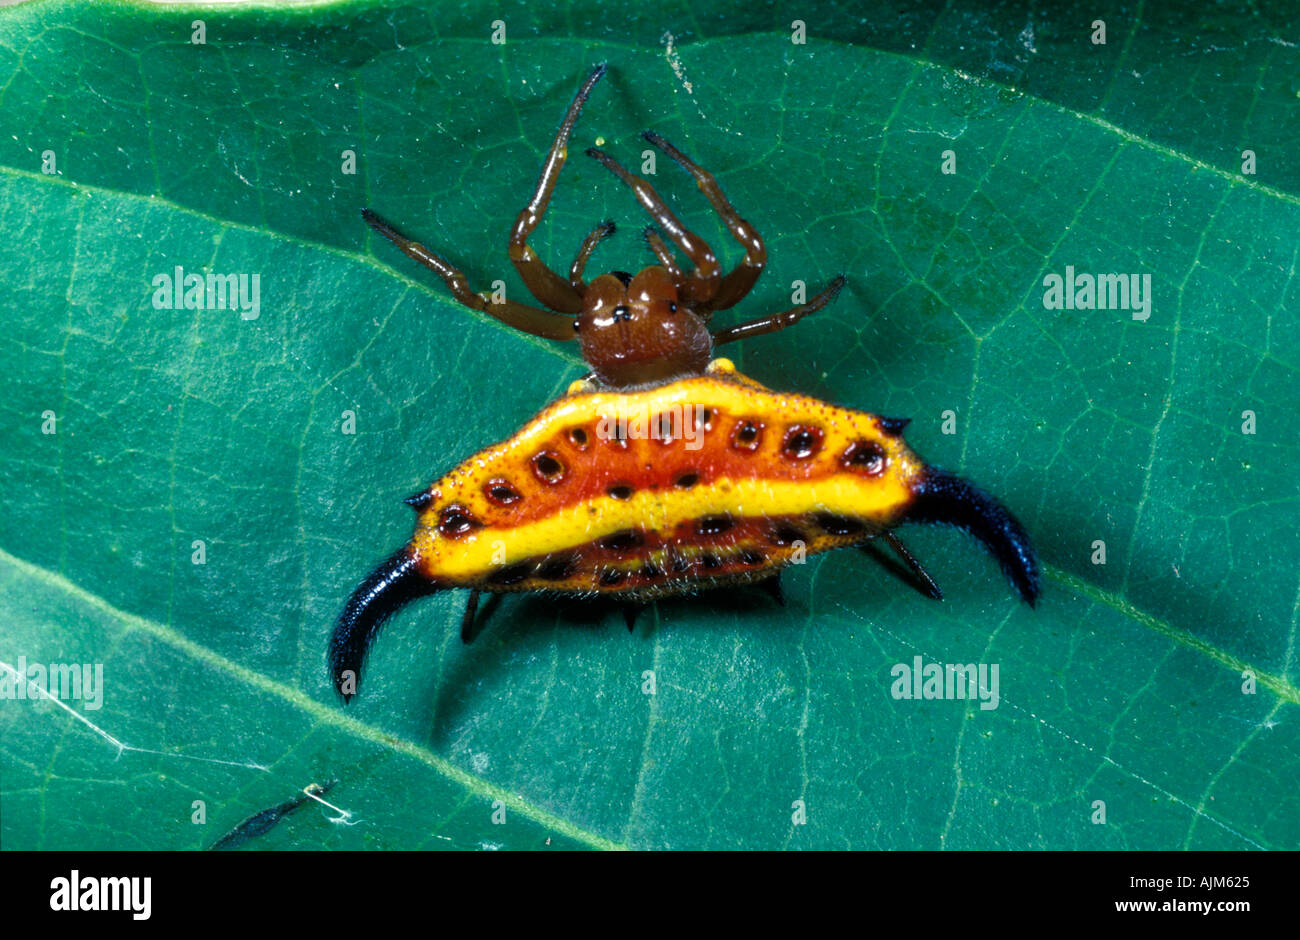 Spiny spider red and yellow Gasteracantha sp Madagascar tropical forests Stock Photo